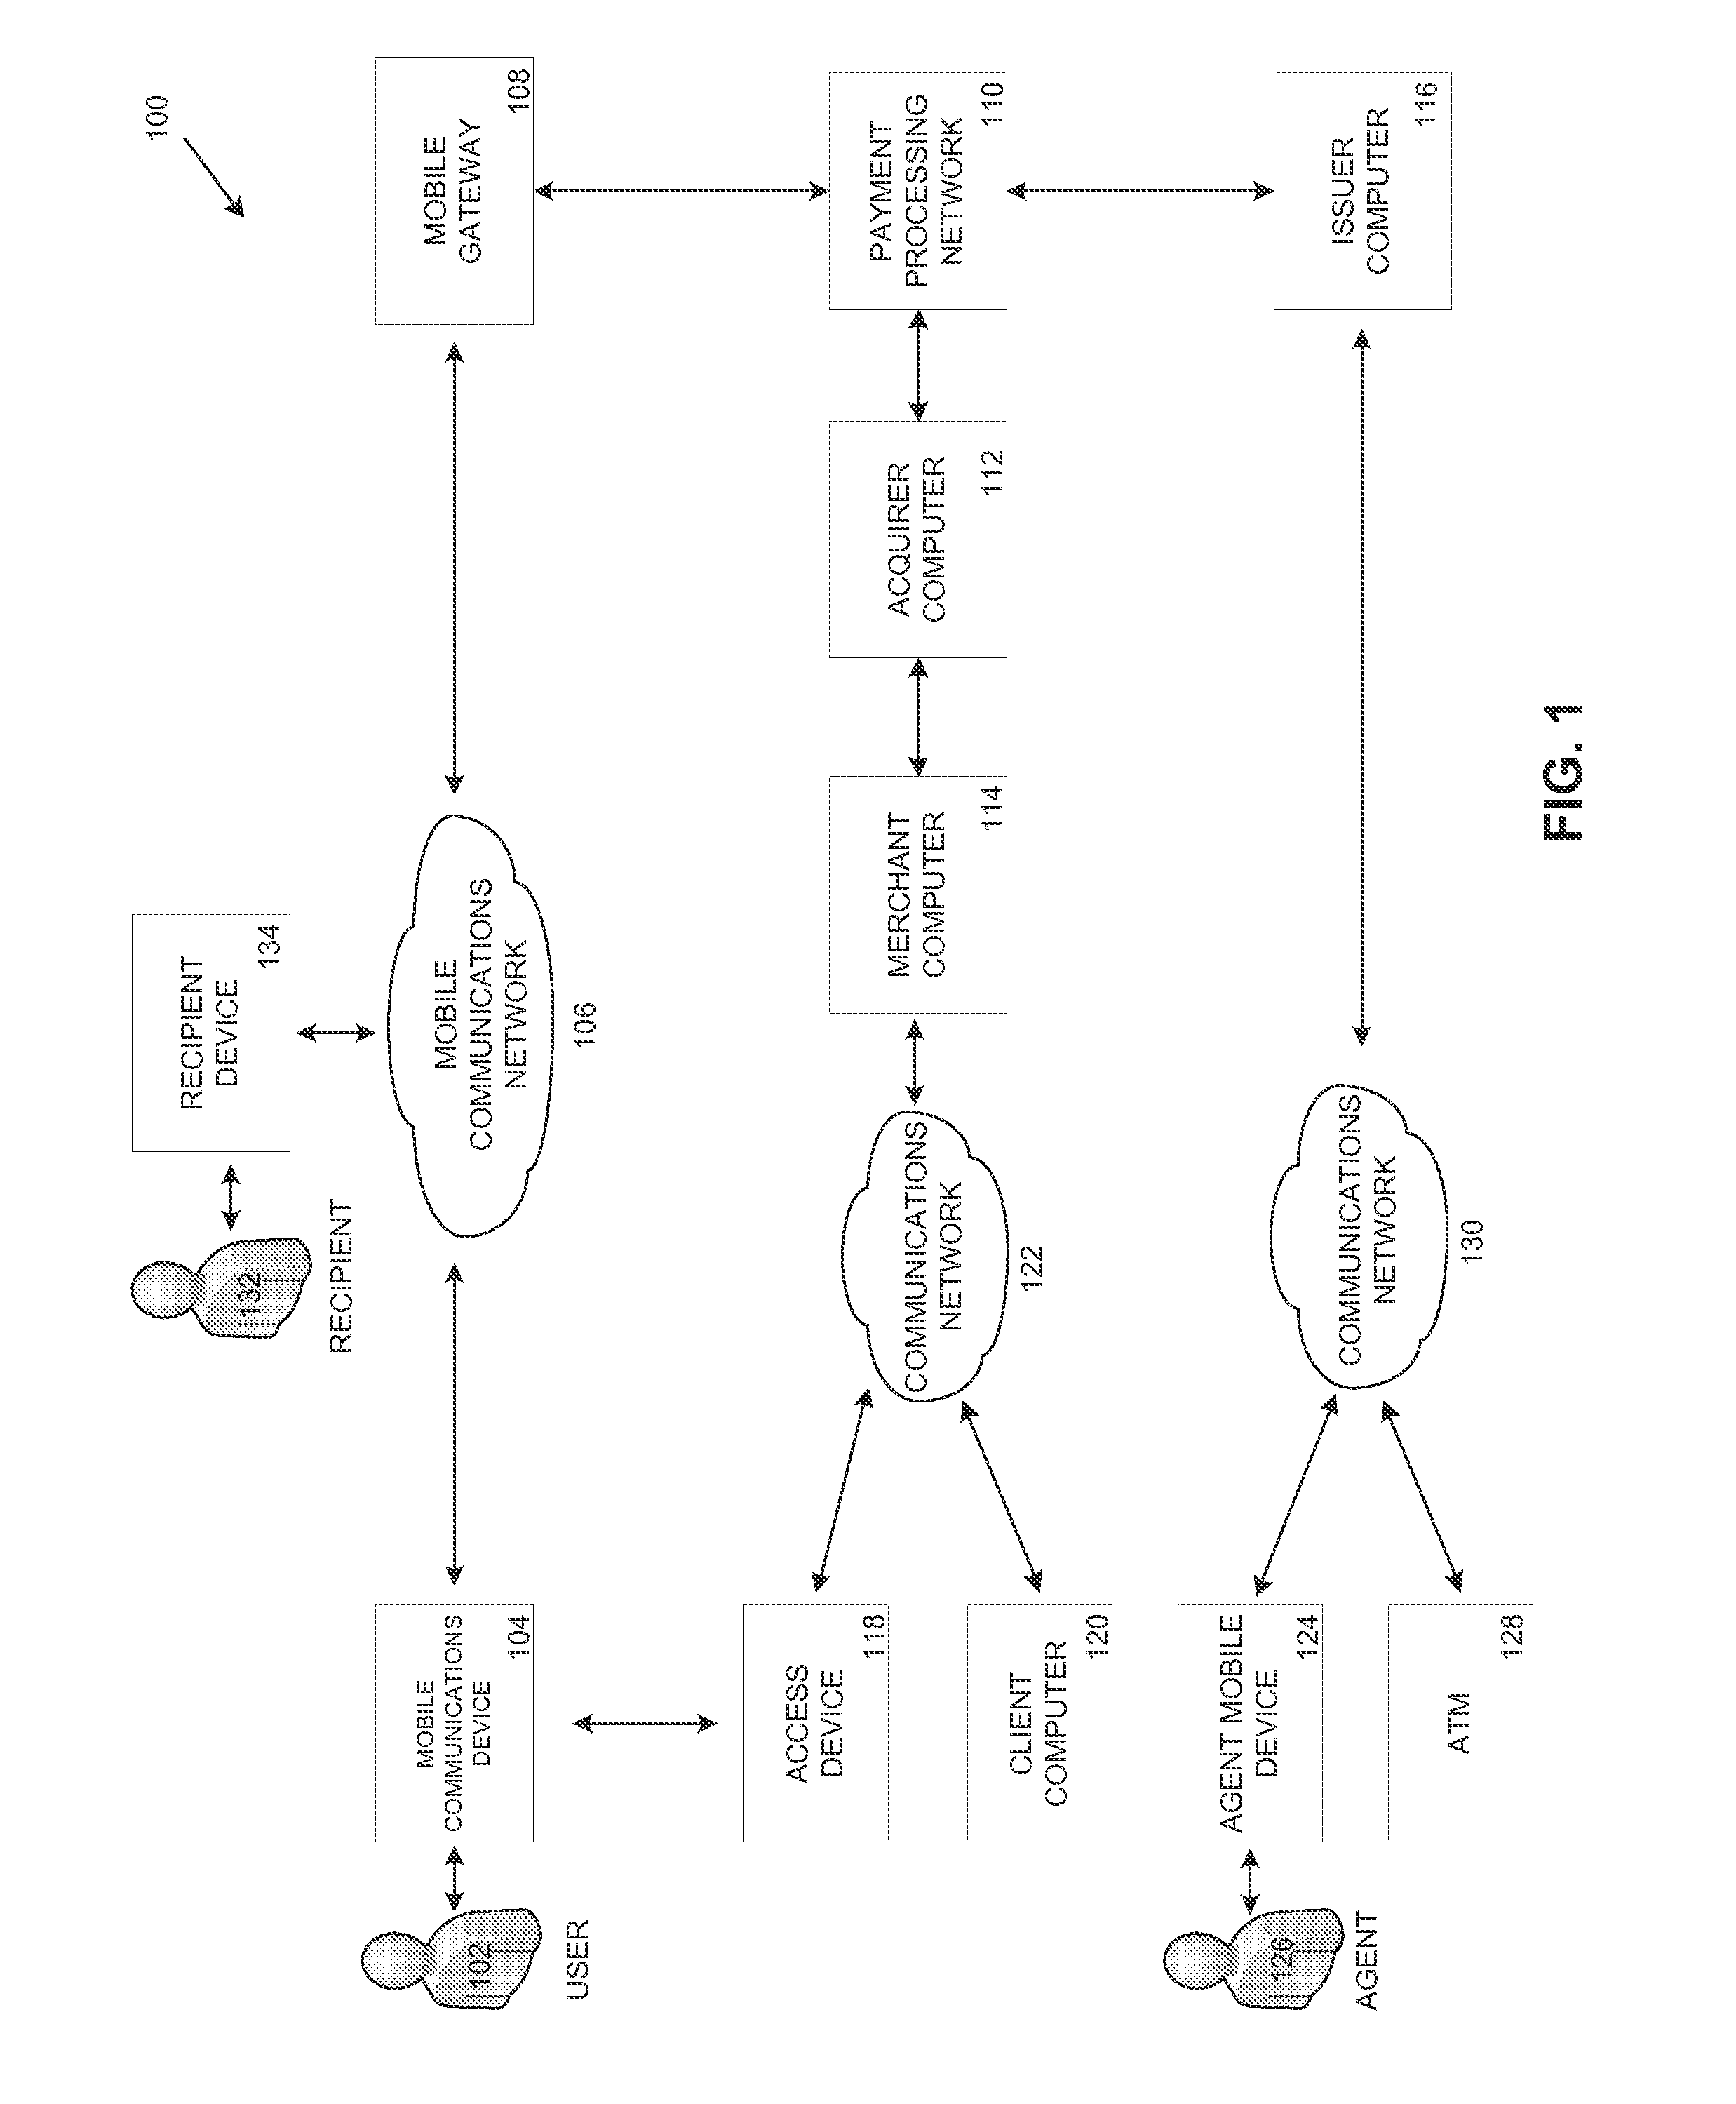 Data security system using mobile communications device